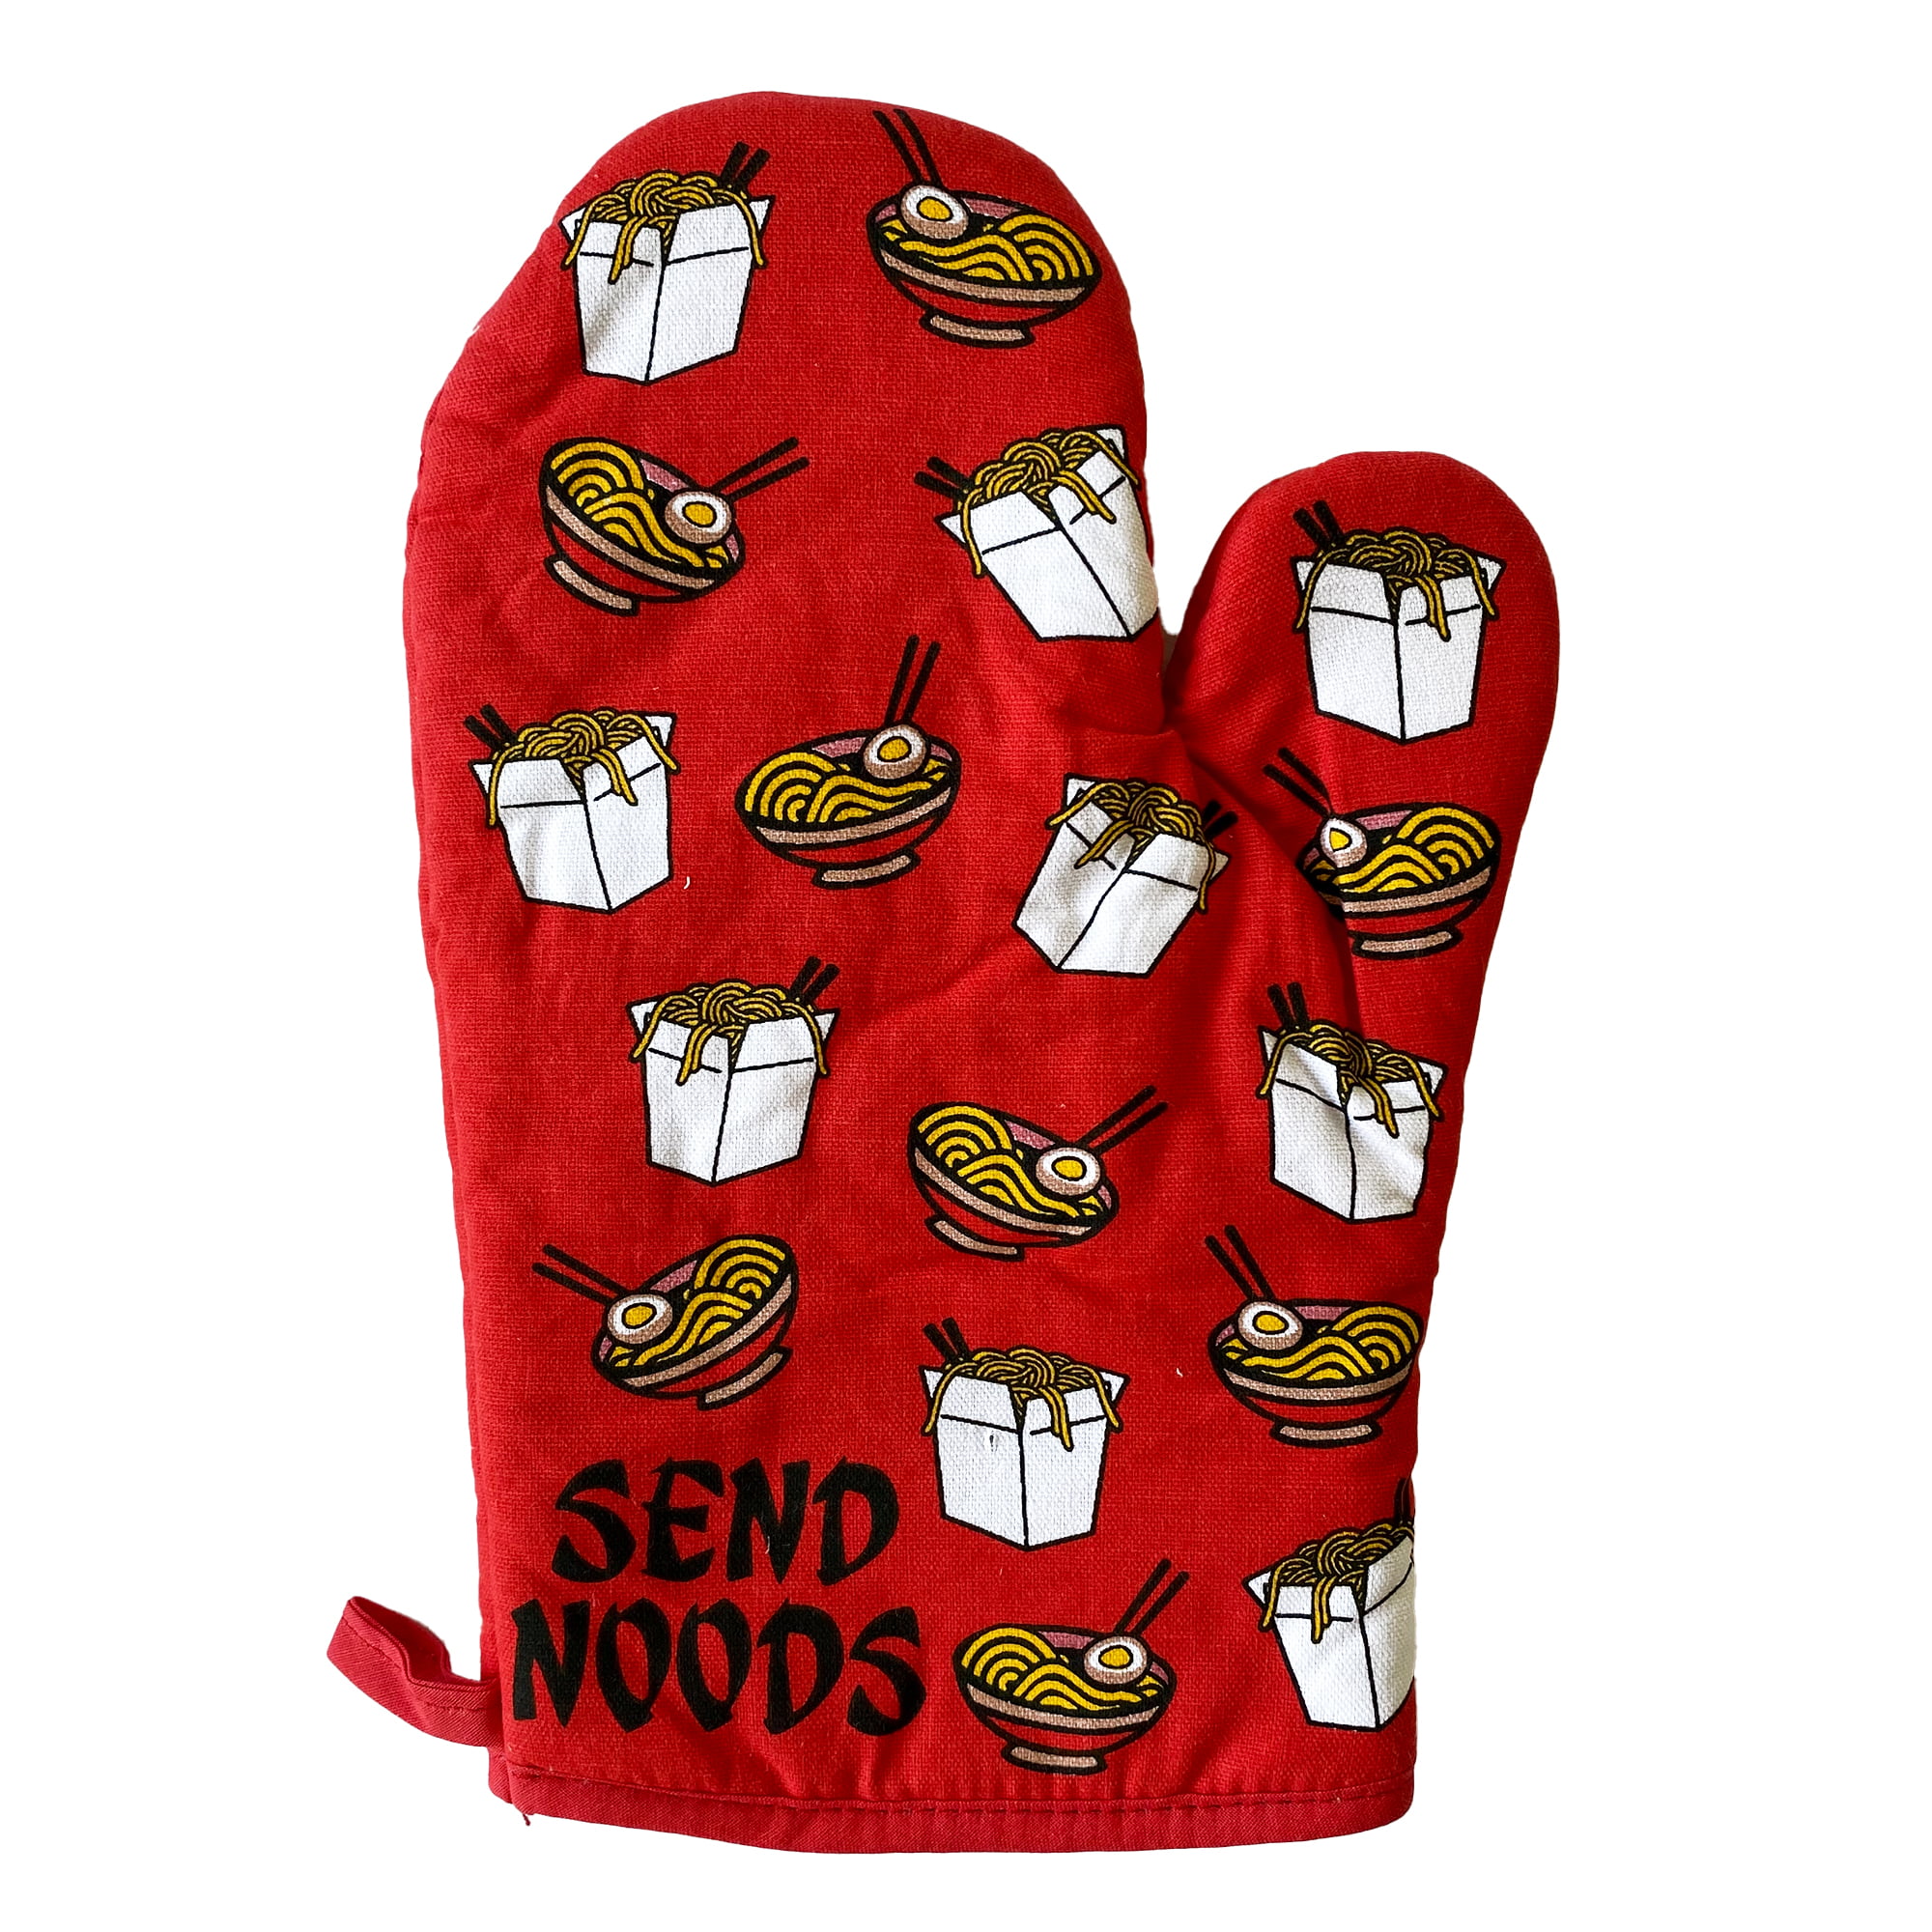 Miso Cute Oven Mitt Funny Cute Japanesse Soup Novelty Kitchen Pot Holder (Oven Mitts)